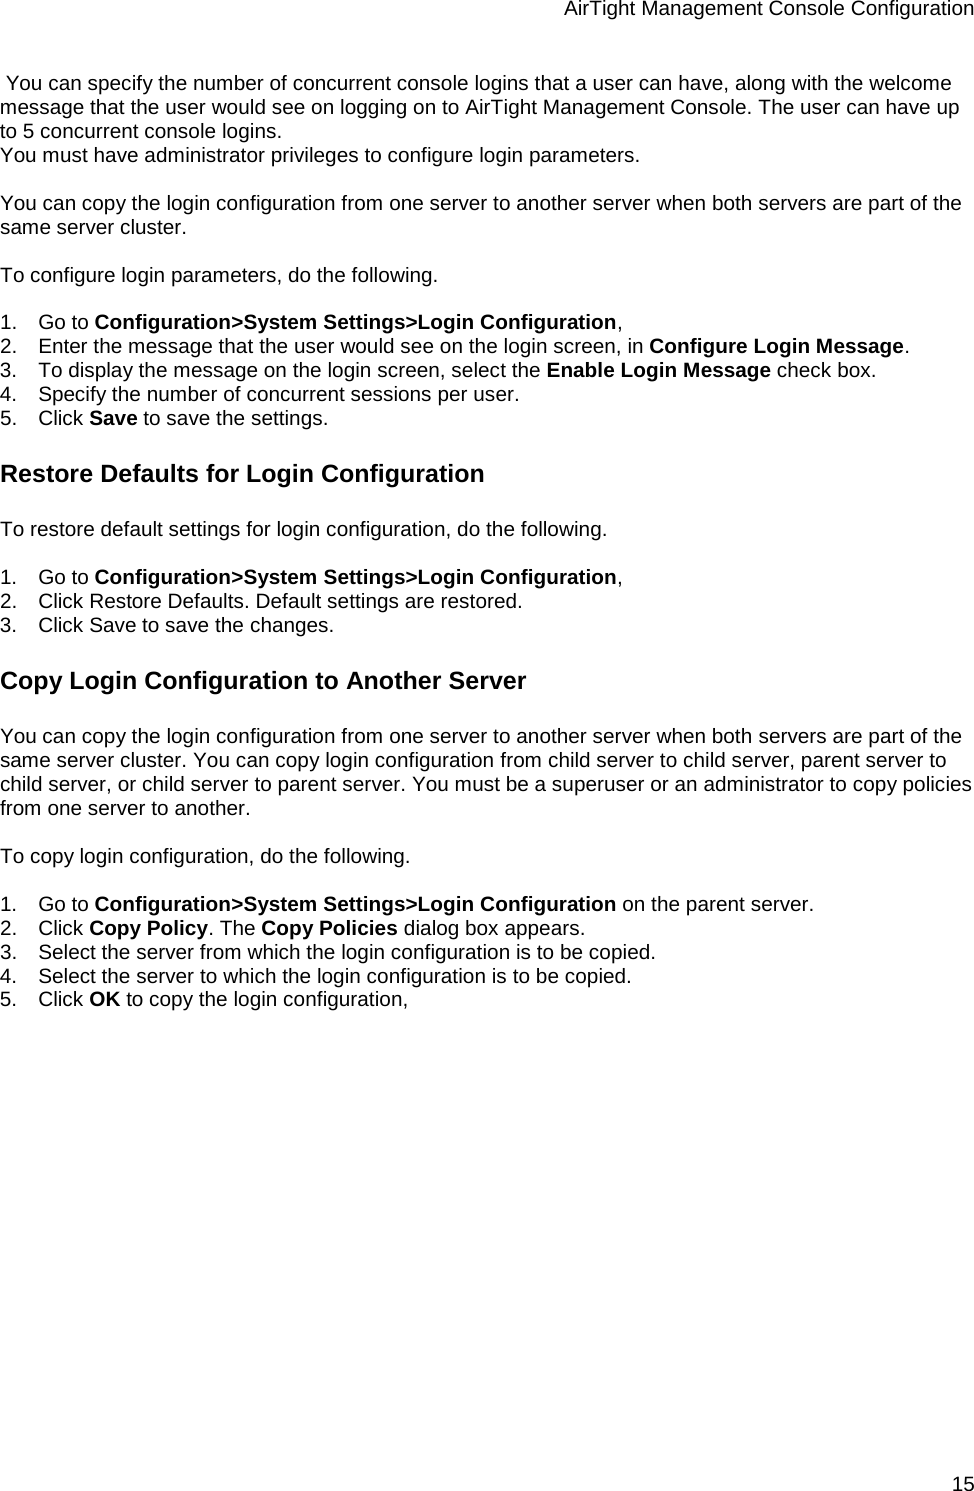 AirTight Management Console Configuration 15  You can specify the number of concurrent console logins that a user can have, along with the welcome message that the user would see on logging on to AirTight Management Console. The user can have up to 5 concurrent console logins. You must have administrator privileges to configure login parameters.   You can copy the login configuration from one server to another server when both servers are part of the same server cluster.   To configure login parameters, do the following.   1.      Go to Configuration&gt;System Settings&gt;Login Configuration, 2.      Enter the message that the user would see on the login screen, in Configure Login Message.  3.      To display the message on the login screen, select the Enable Login Message check box. 4.      Specify the number of concurrent sessions per user. 5.      Click Save to save the settings.  Restore Defaults for Login Configuration To restore default settings for login configuration, do the following.   1.      Go to Configuration&gt;System Settings&gt;Login Configuration, 2.      Click Restore Defaults. Default settings are restored. 3.      Click Save to save the changes. Copy Login Configuration to Another Server You can copy the login configuration from one server to another server when both servers are part of the same server cluster. You can copy login configuration from child server to child server, parent server to child server, or child server to parent server. You must be a superuser or an administrator to copy policies from one server to another.   To copy login configuration, do the following.   1.      Go to Configuration&gt;System Settings&gt;Login Configuration on the parent server. 2.      Click Copy Policy. The Copy Policies dialog box appears. 3.      Select the server from which the login configuration is to be copied. 4.      Select the server to which the login configuration is to be copied. 5.      Click OK to copy the login configuration,   